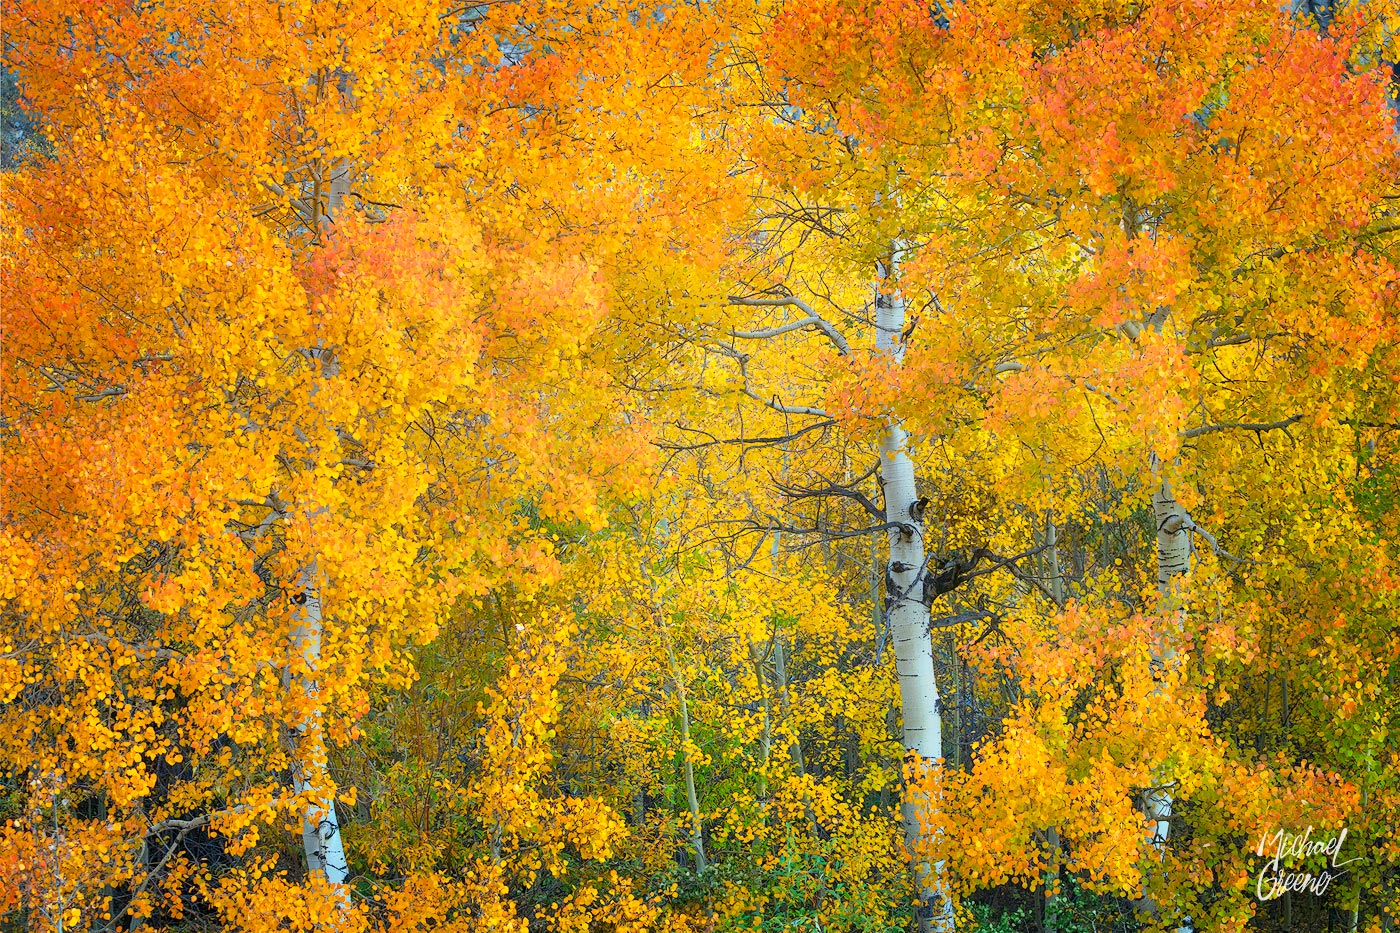 The best autumn colors I saw on a six-day photography captured on a frigid morning in early October near South Fork, Colorado...